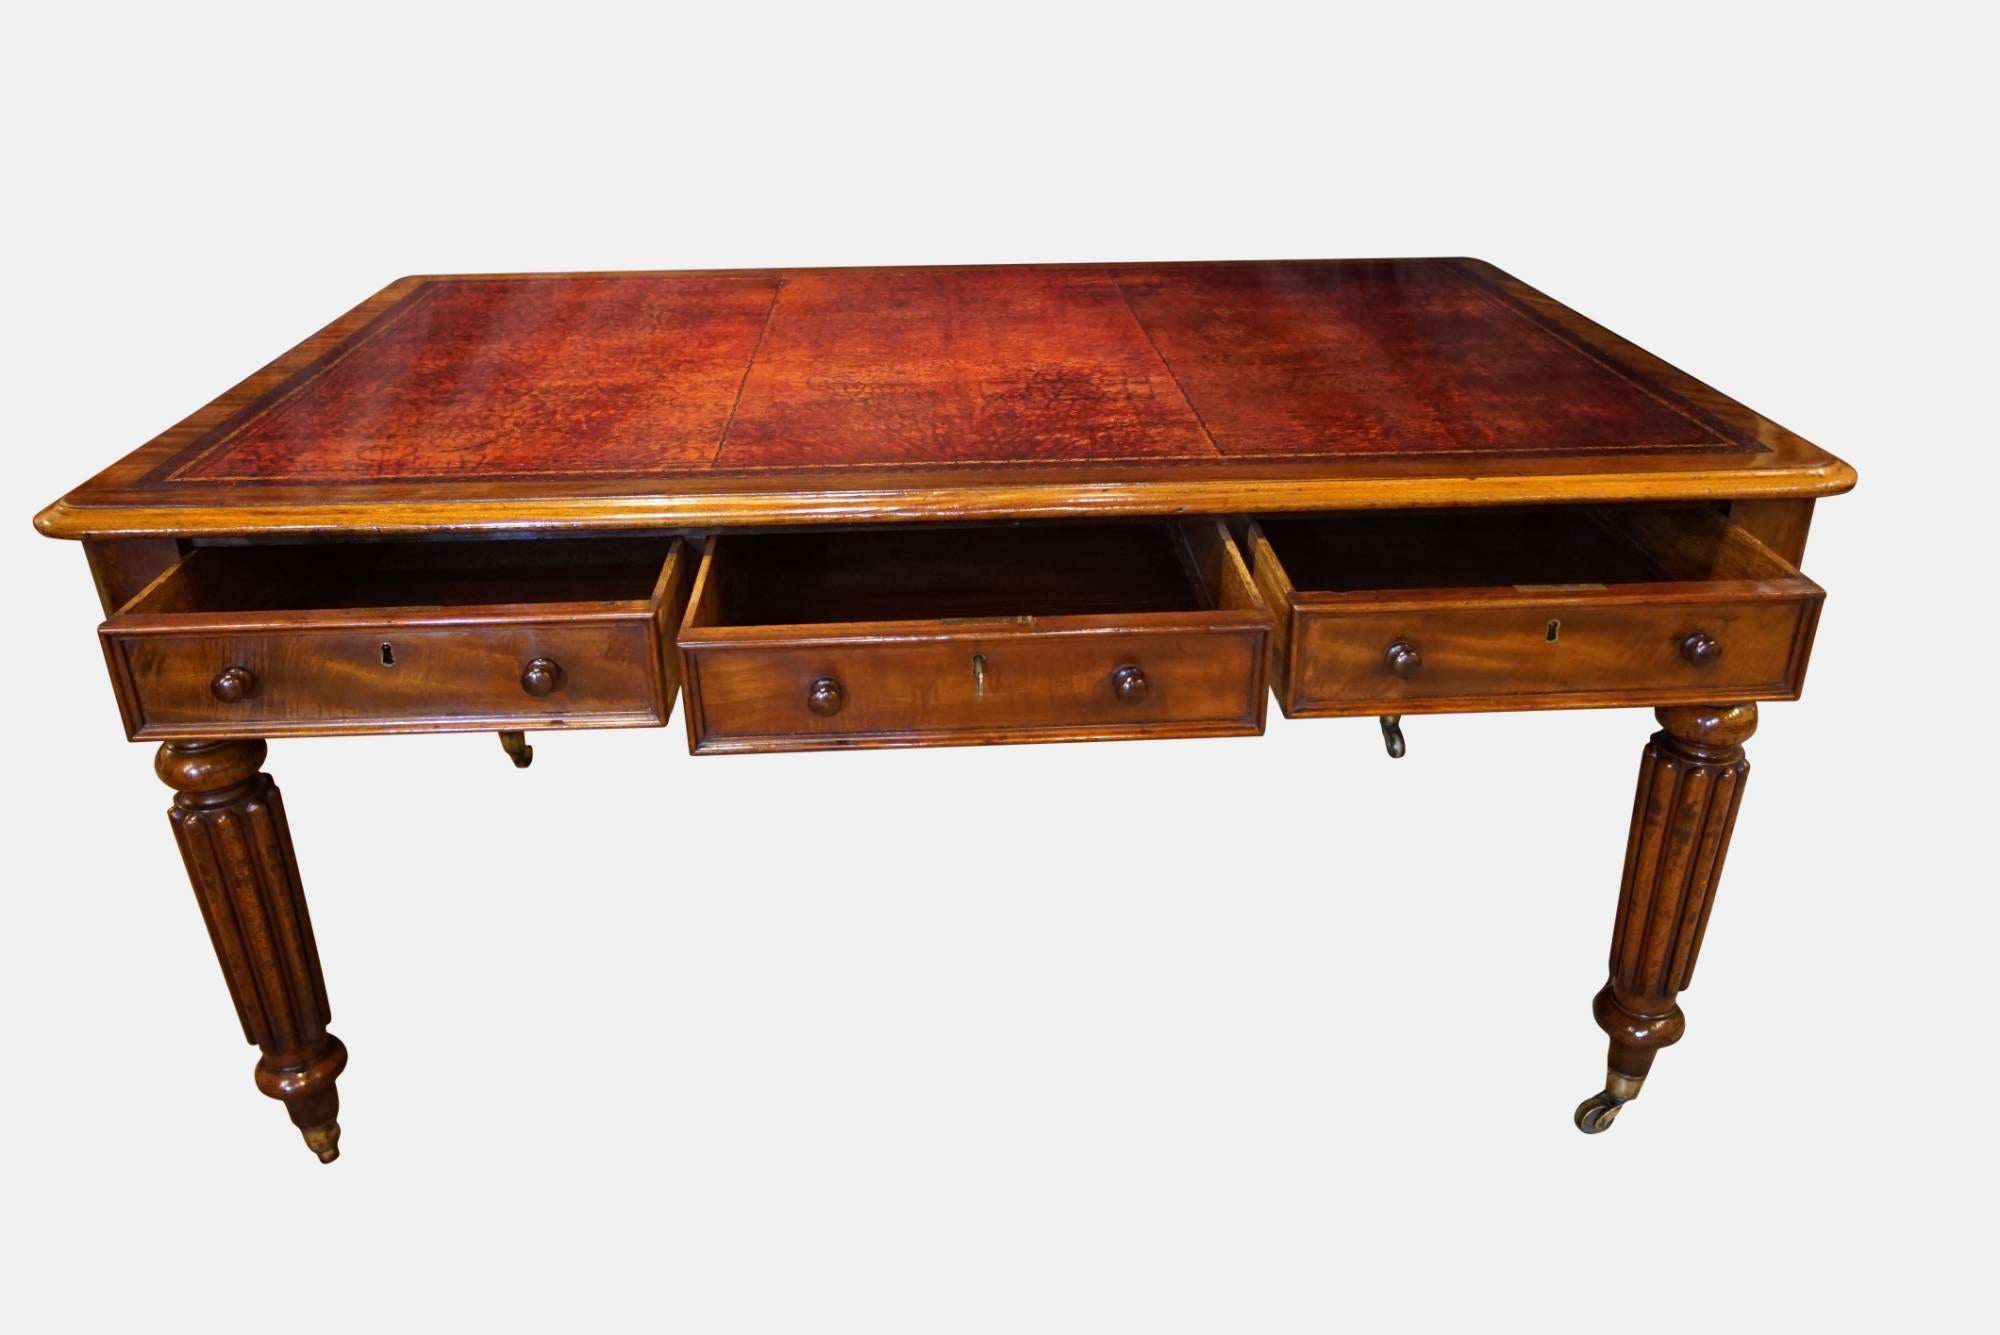 A 19th century six-drawer mahogany partners writing table in original condition (leather re-placed)

Makers Name W PRIEST WATER ST BLACKFRIARS

circa 1850.